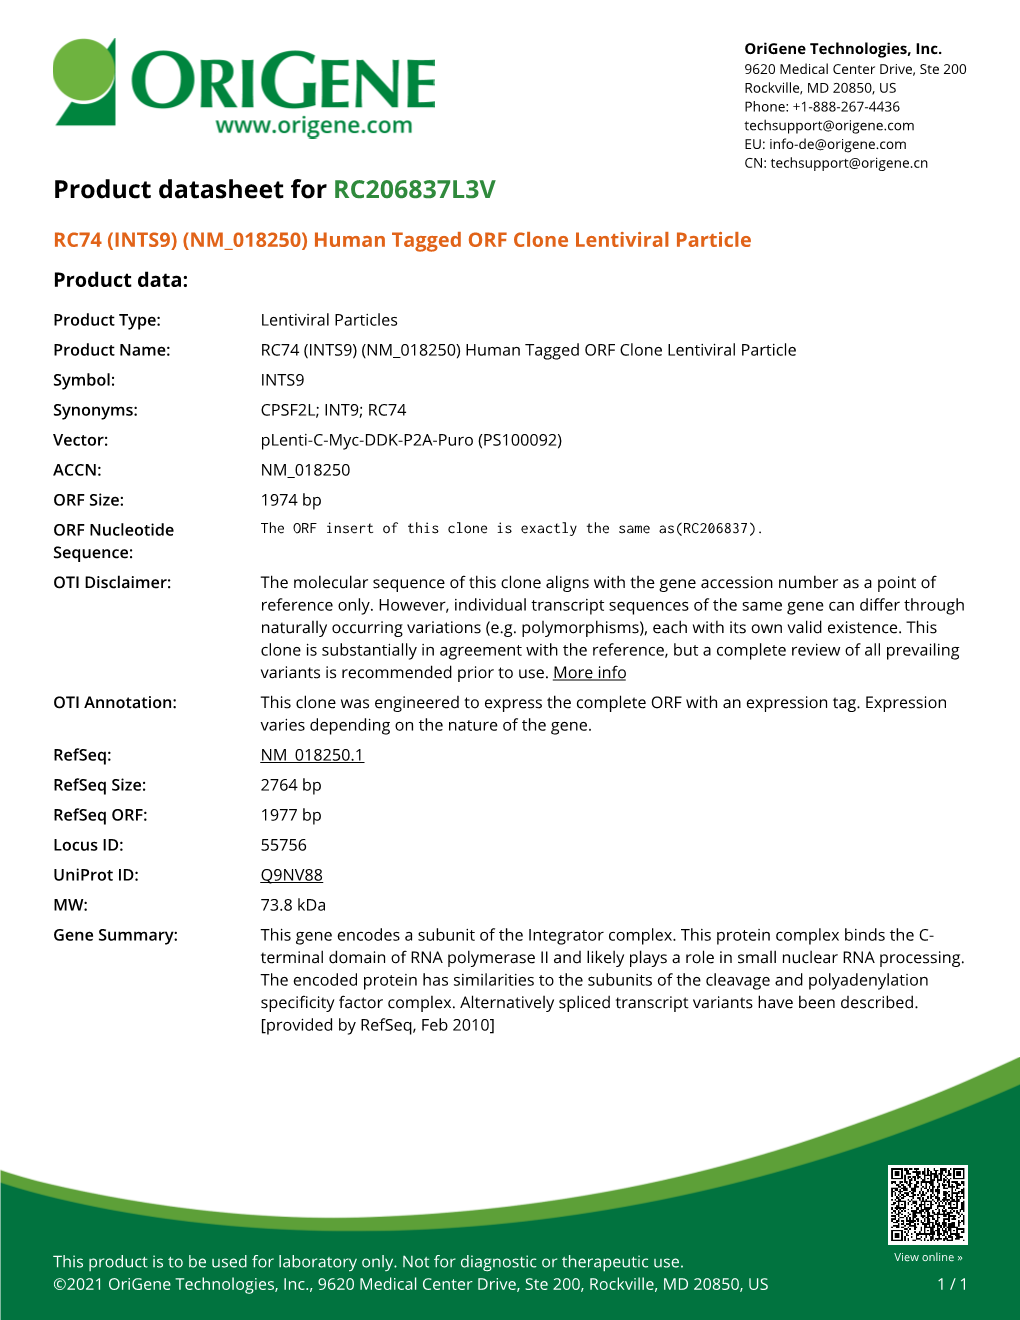 RC74 (INTS9) (NM 018250) Human Tagged ORF Clone Lentiviral Particle Product Data